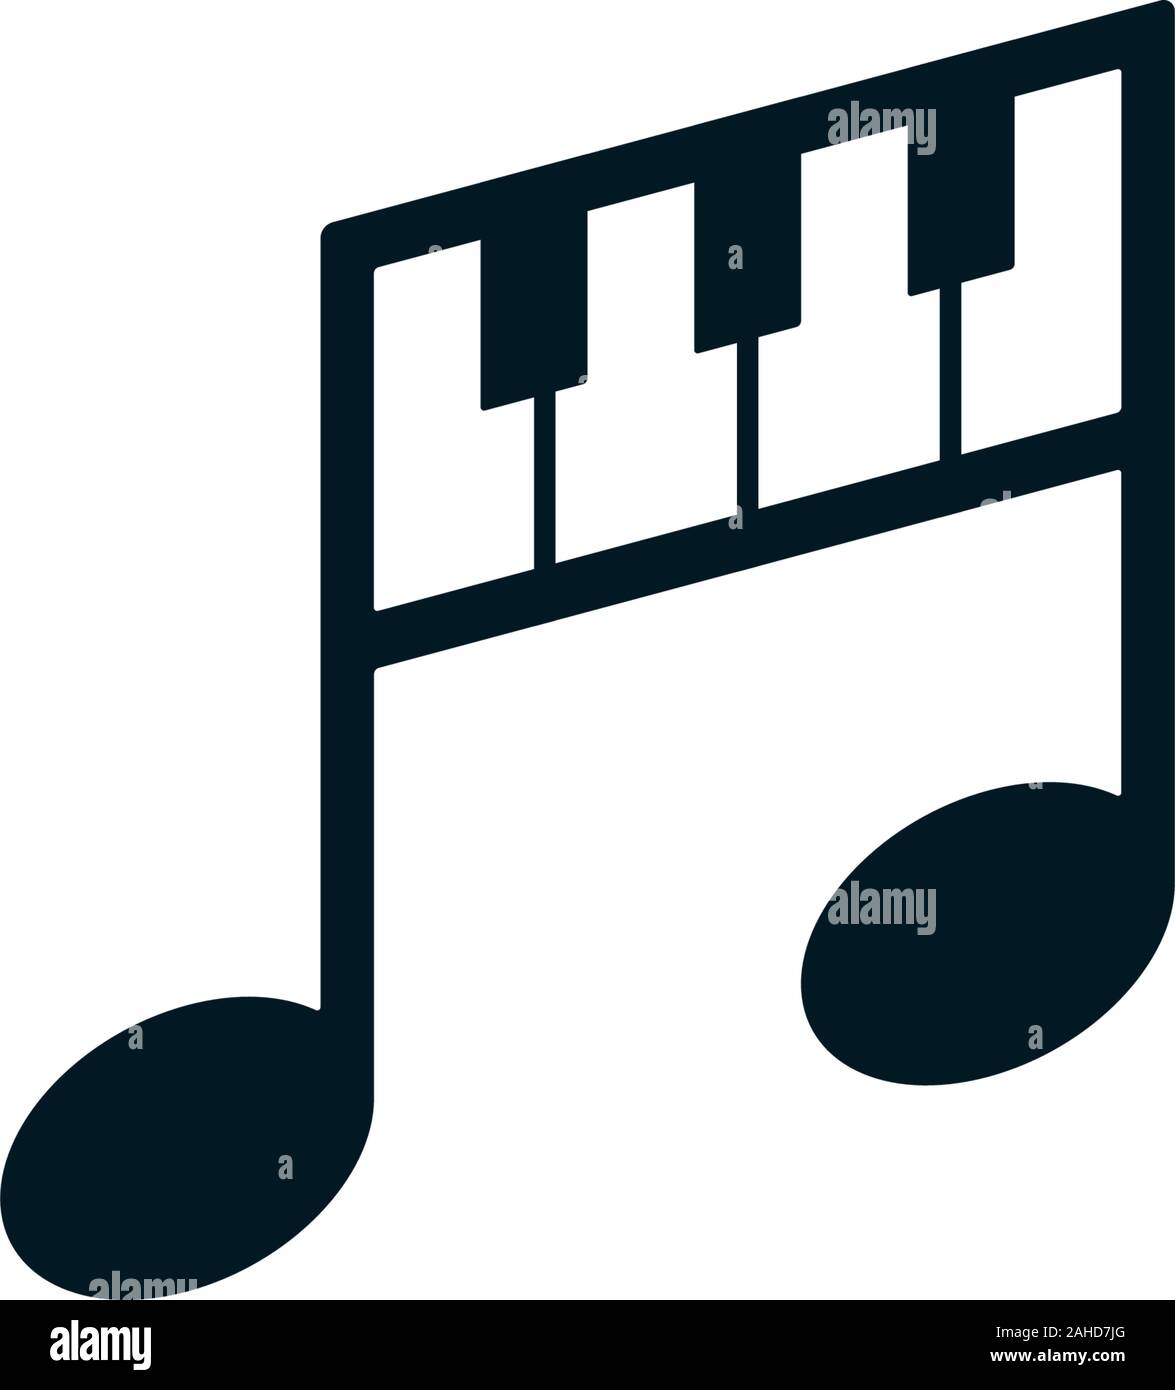 Music notes symbols with piano keyboard. Abstract musical instrument icon design. Stock Vector